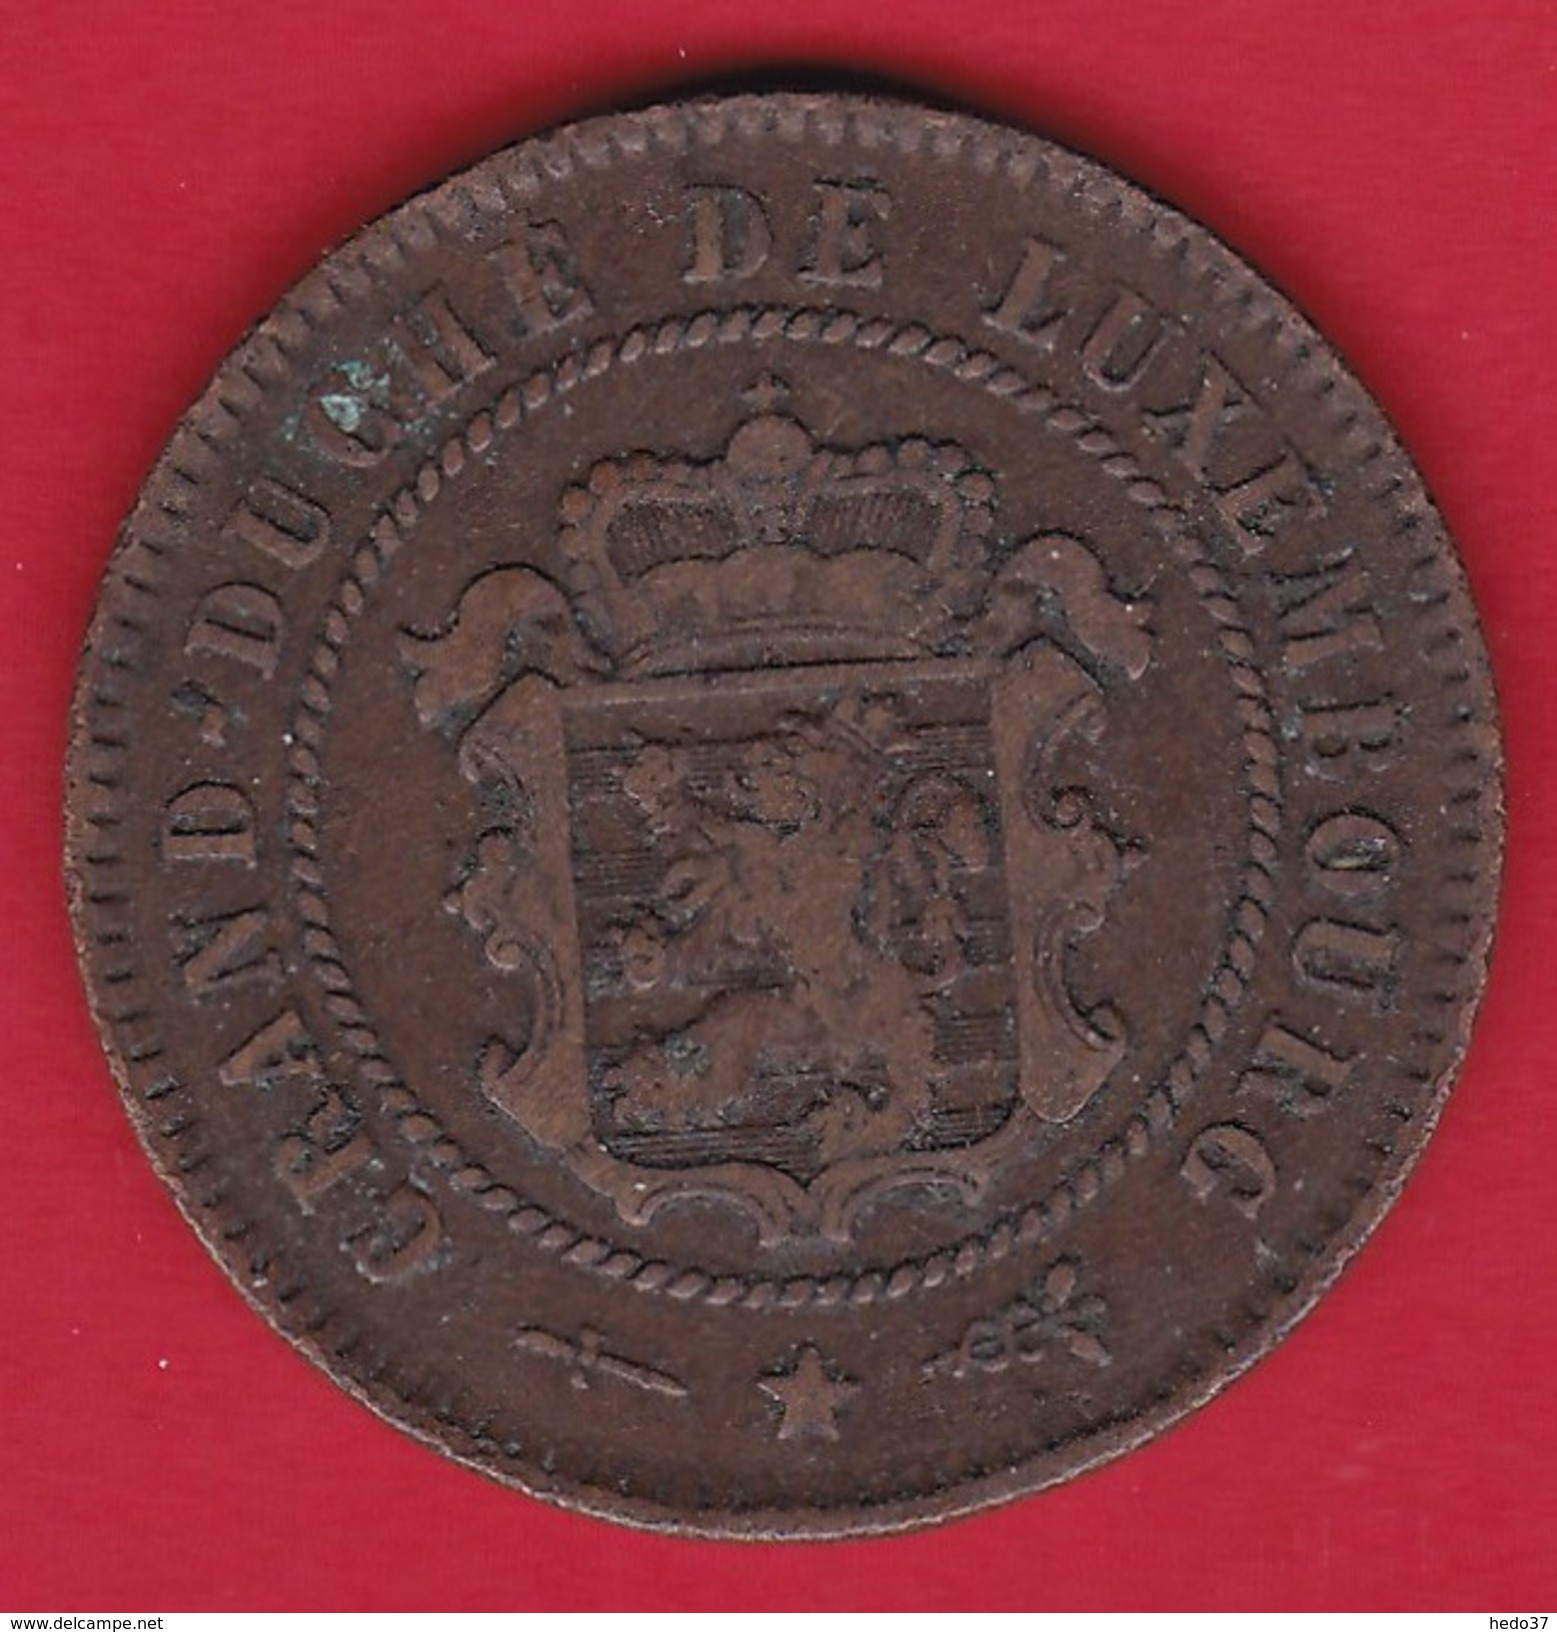 Luxembourg - 5 Centimes - 1854 - Luxemburg